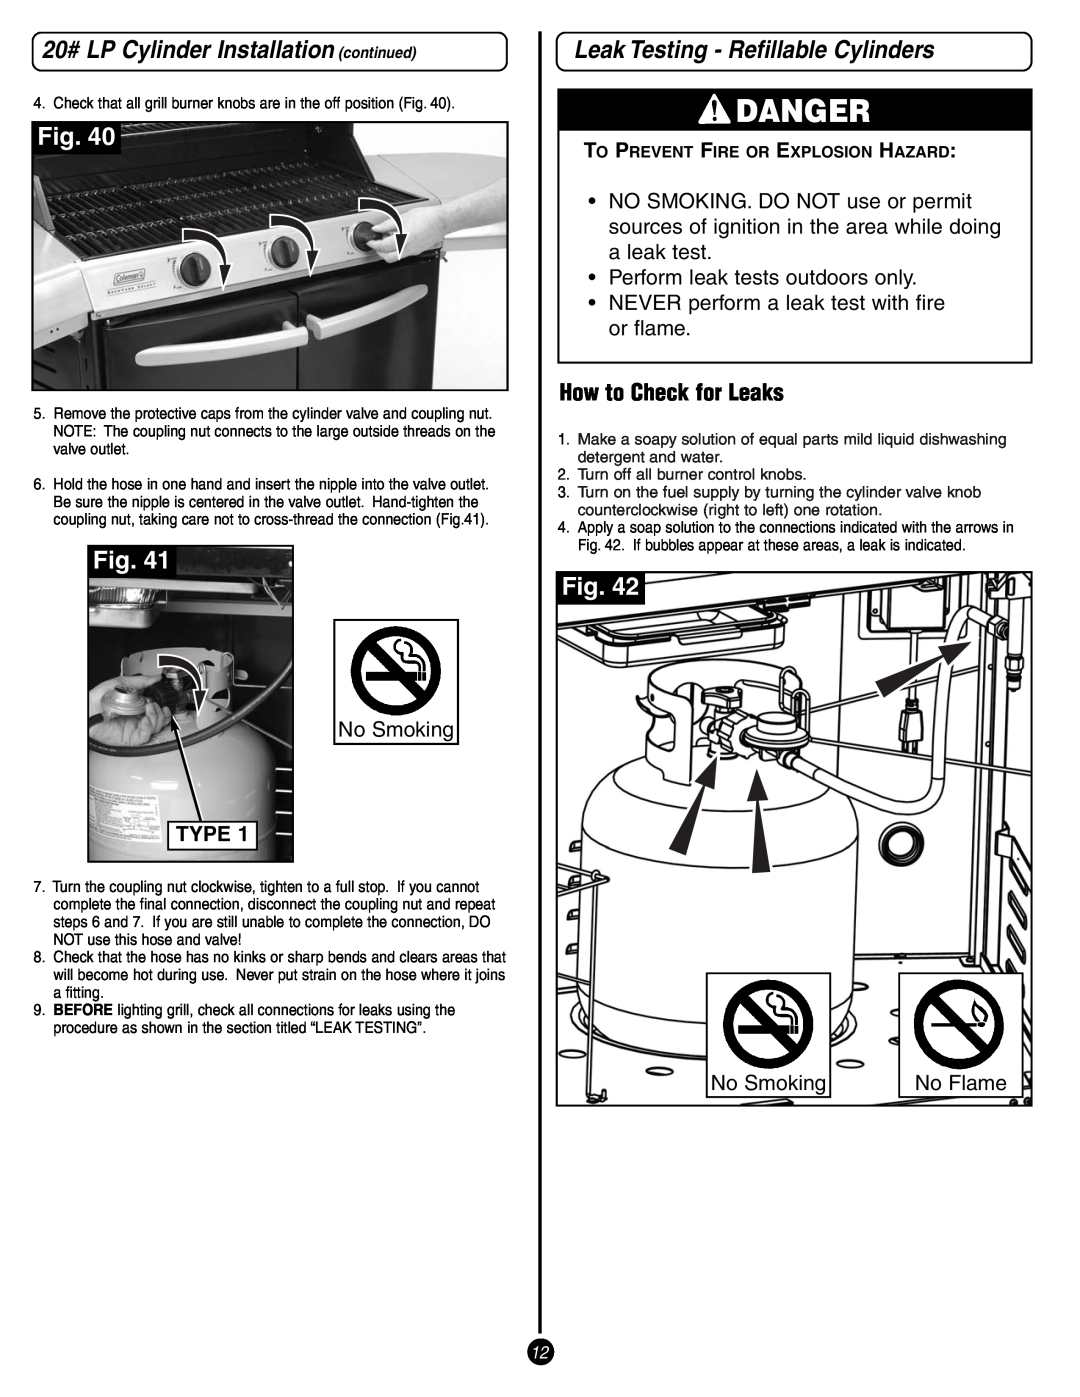 Coleman 9993 manual Leak Testing - Refillable Cylinders, How to Check for Leaks, No Smoking, Type, No Flame, Danger 